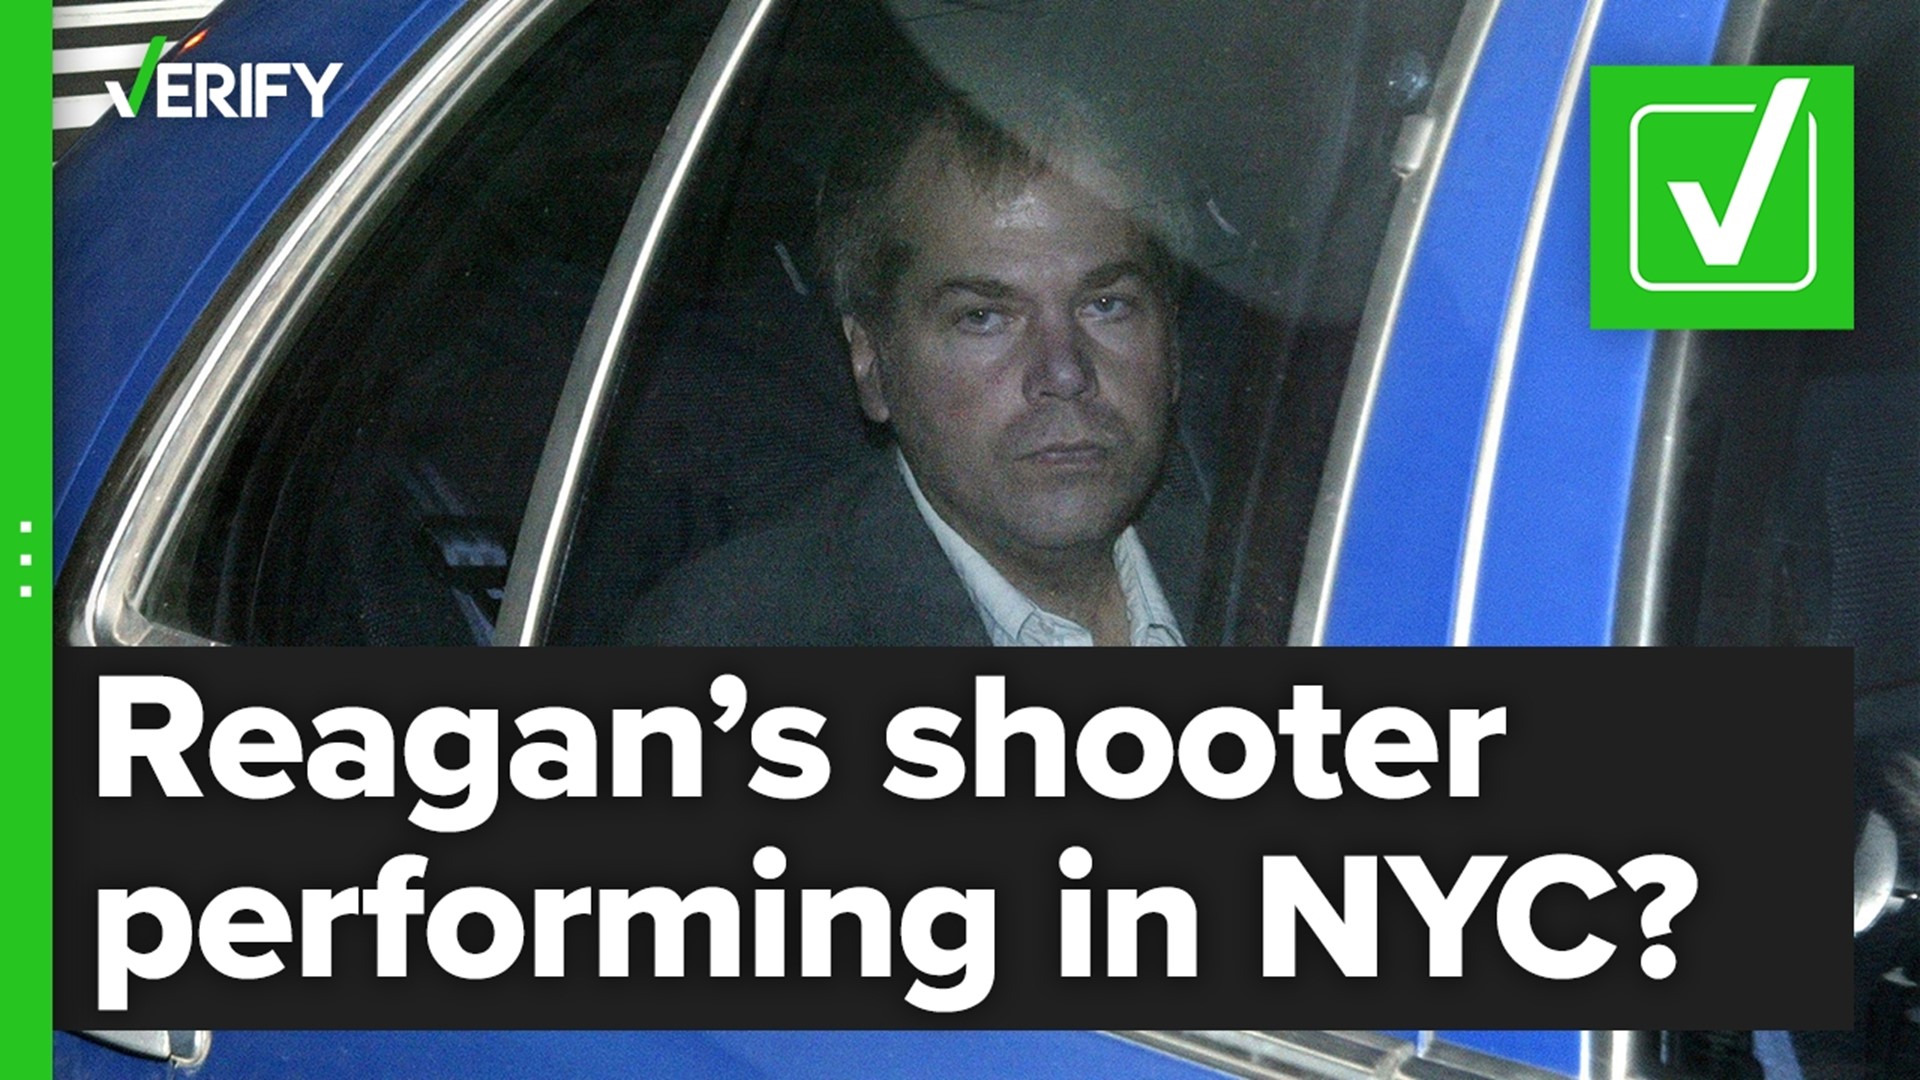 John Hinckley Jr. attempted to assassinate President Ronald Reagan in 1981. More than 40 years later, he’s making music and has sold out a Brooklyn concert venue.